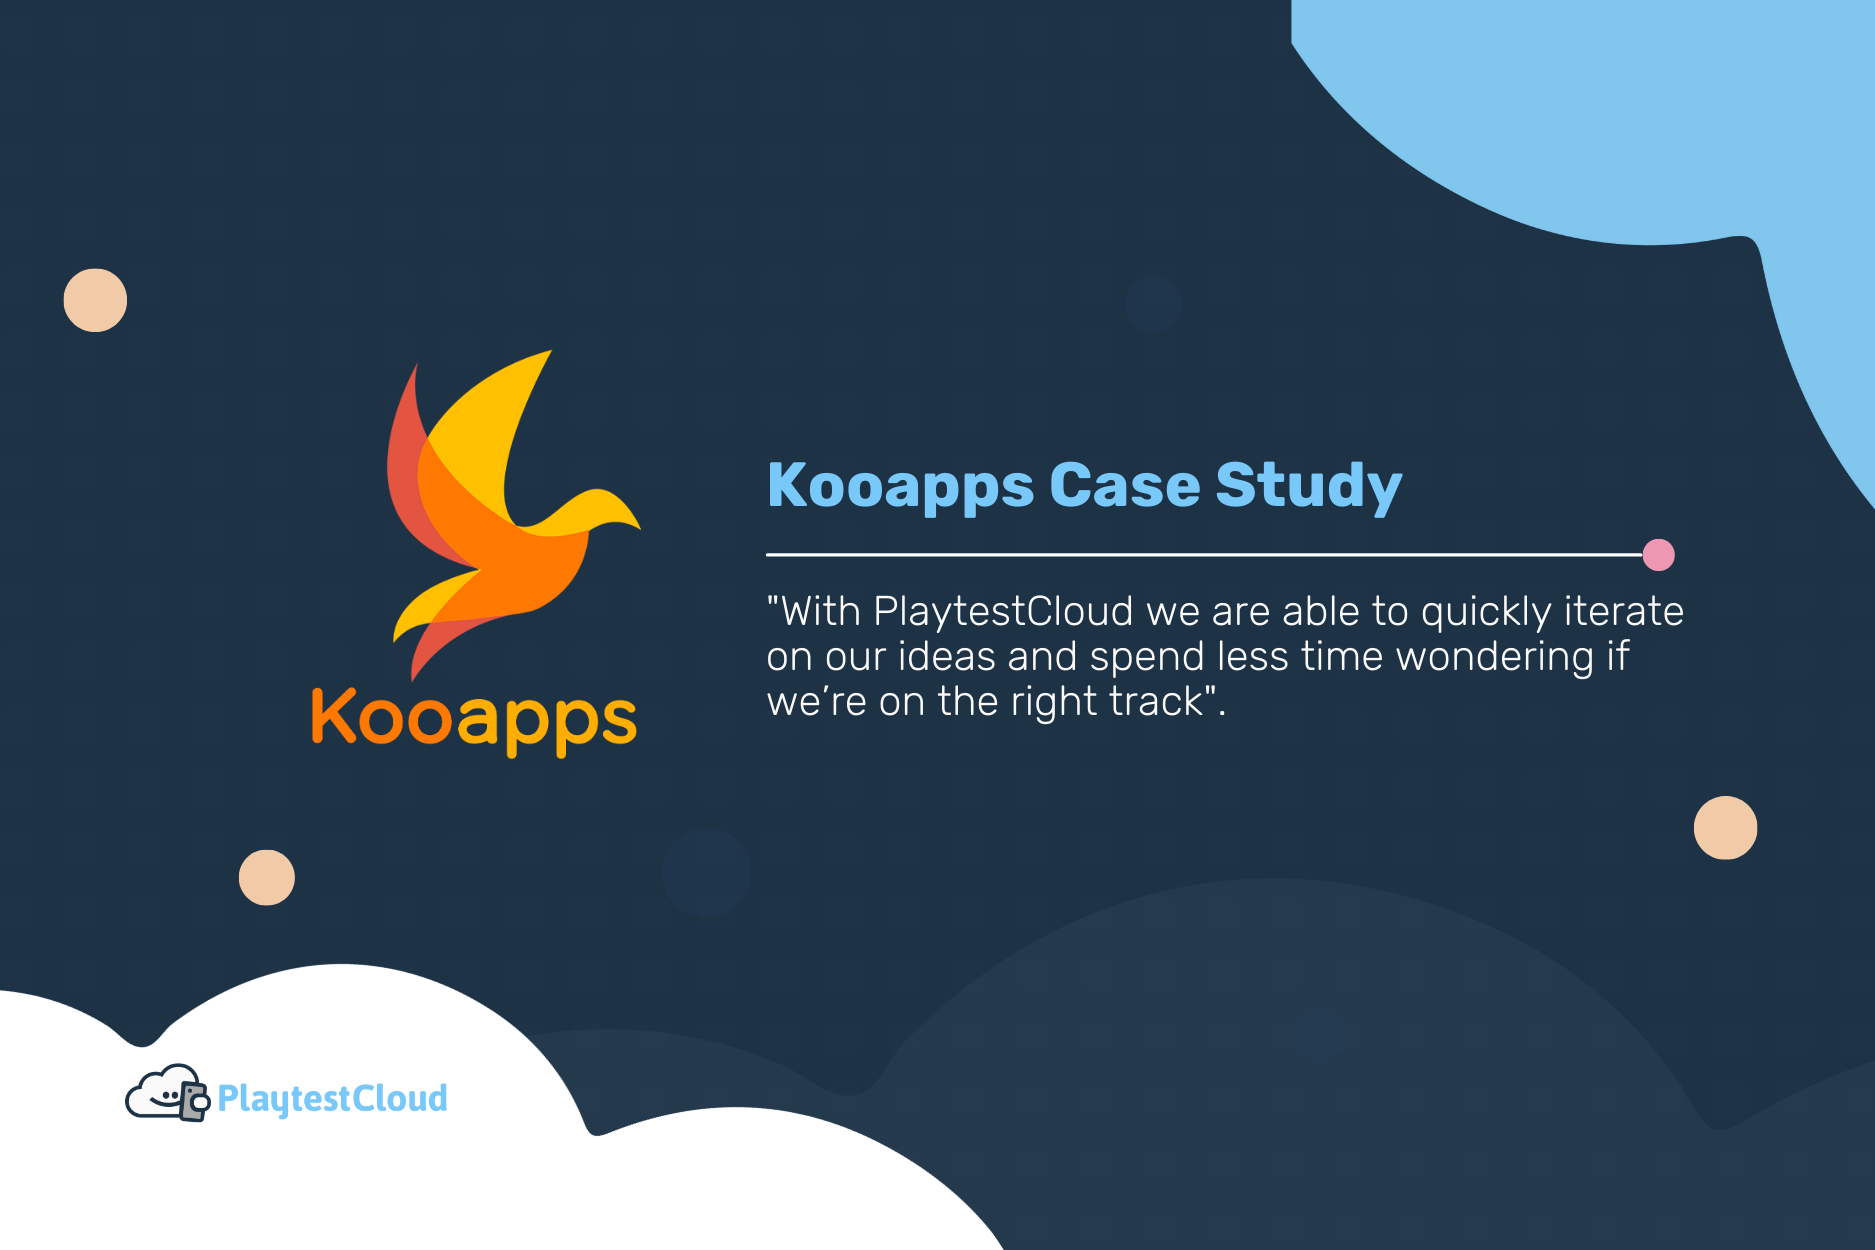 Playtesting helped Kooapps increase daily active users by more than 10%